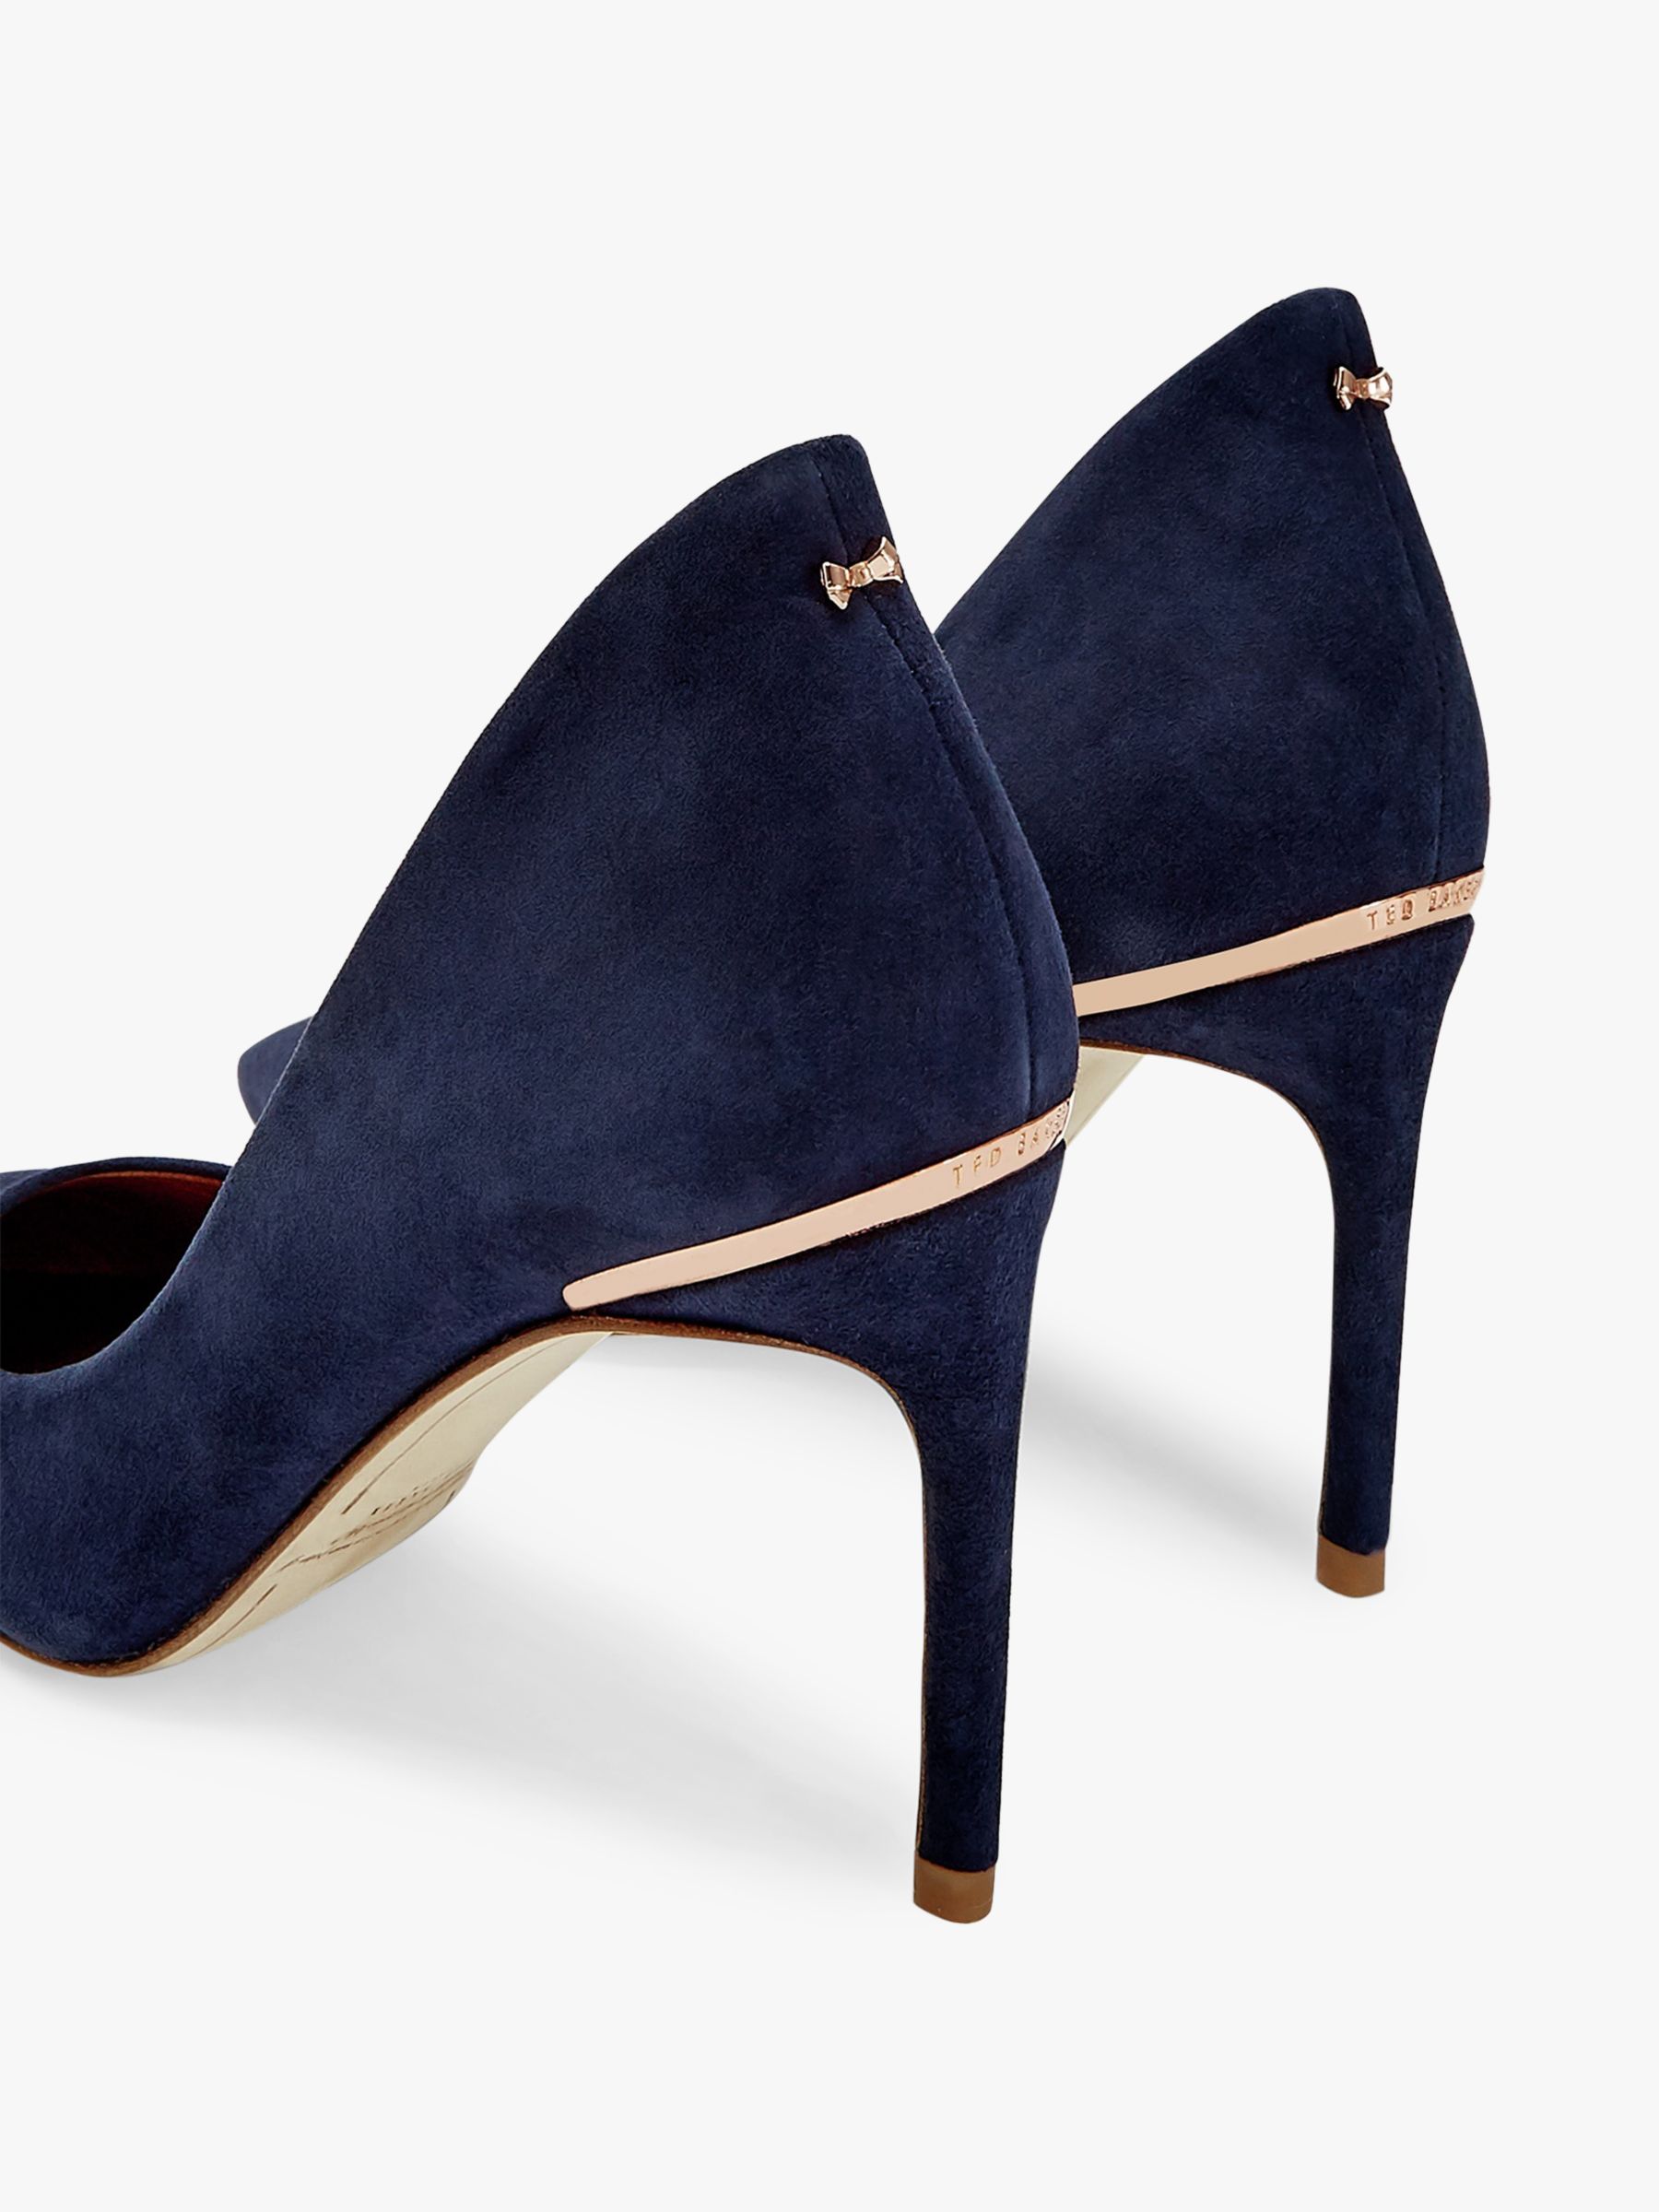 navy suede court shoes uk